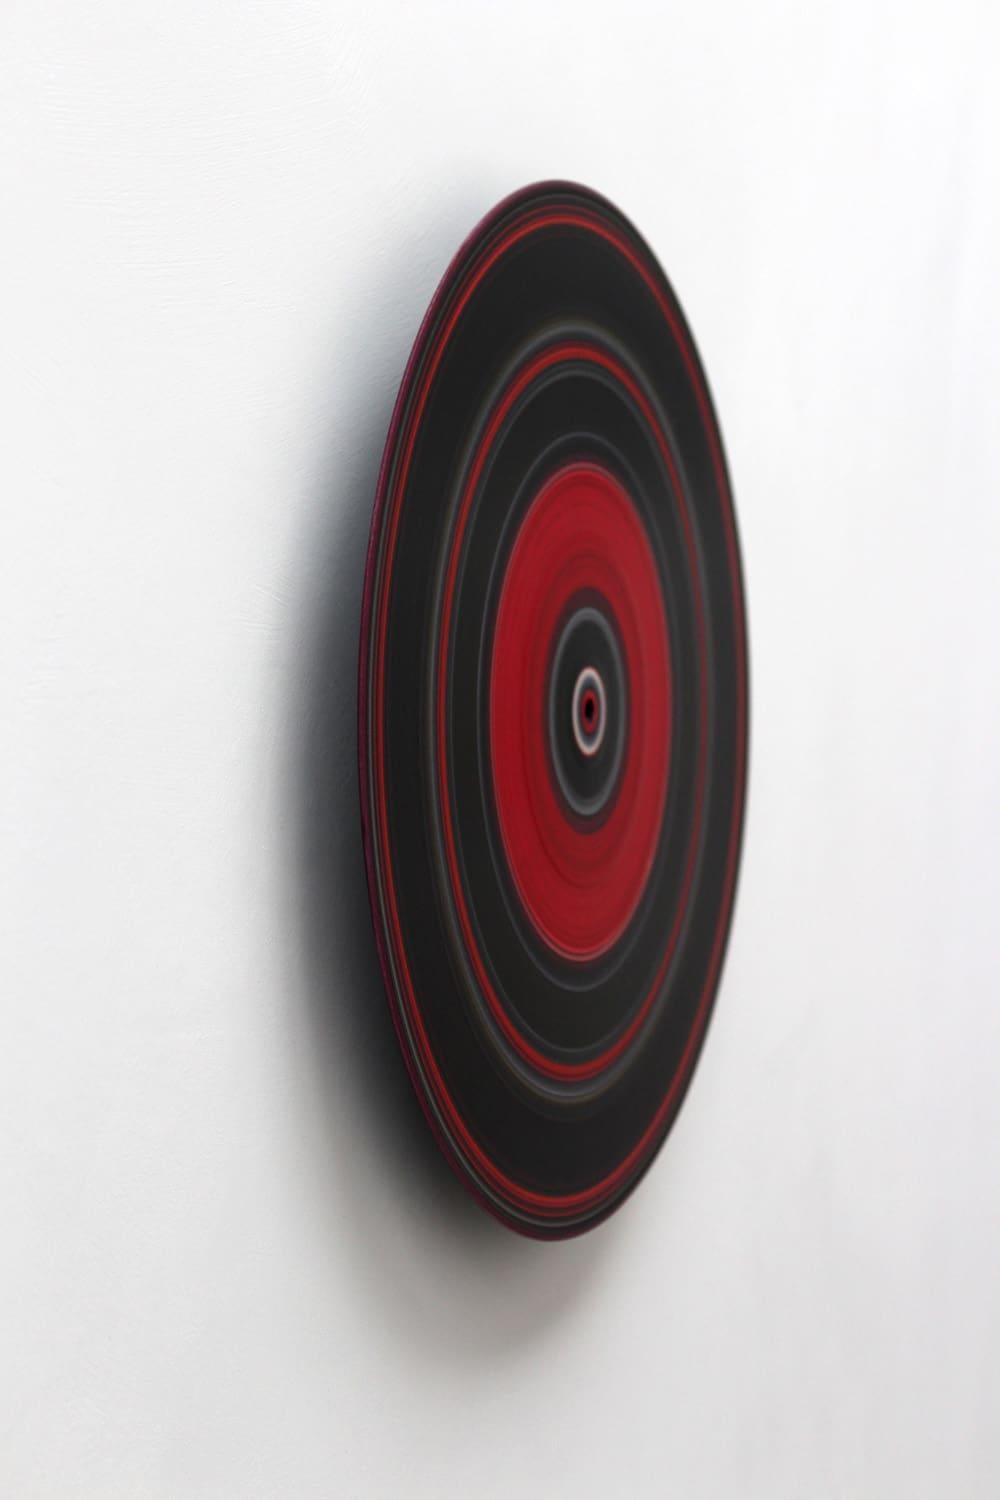 Red Hot Chili Peppers No. 33 by Doris Marten - Oil on vinyl, music, circle, line For Sale 2